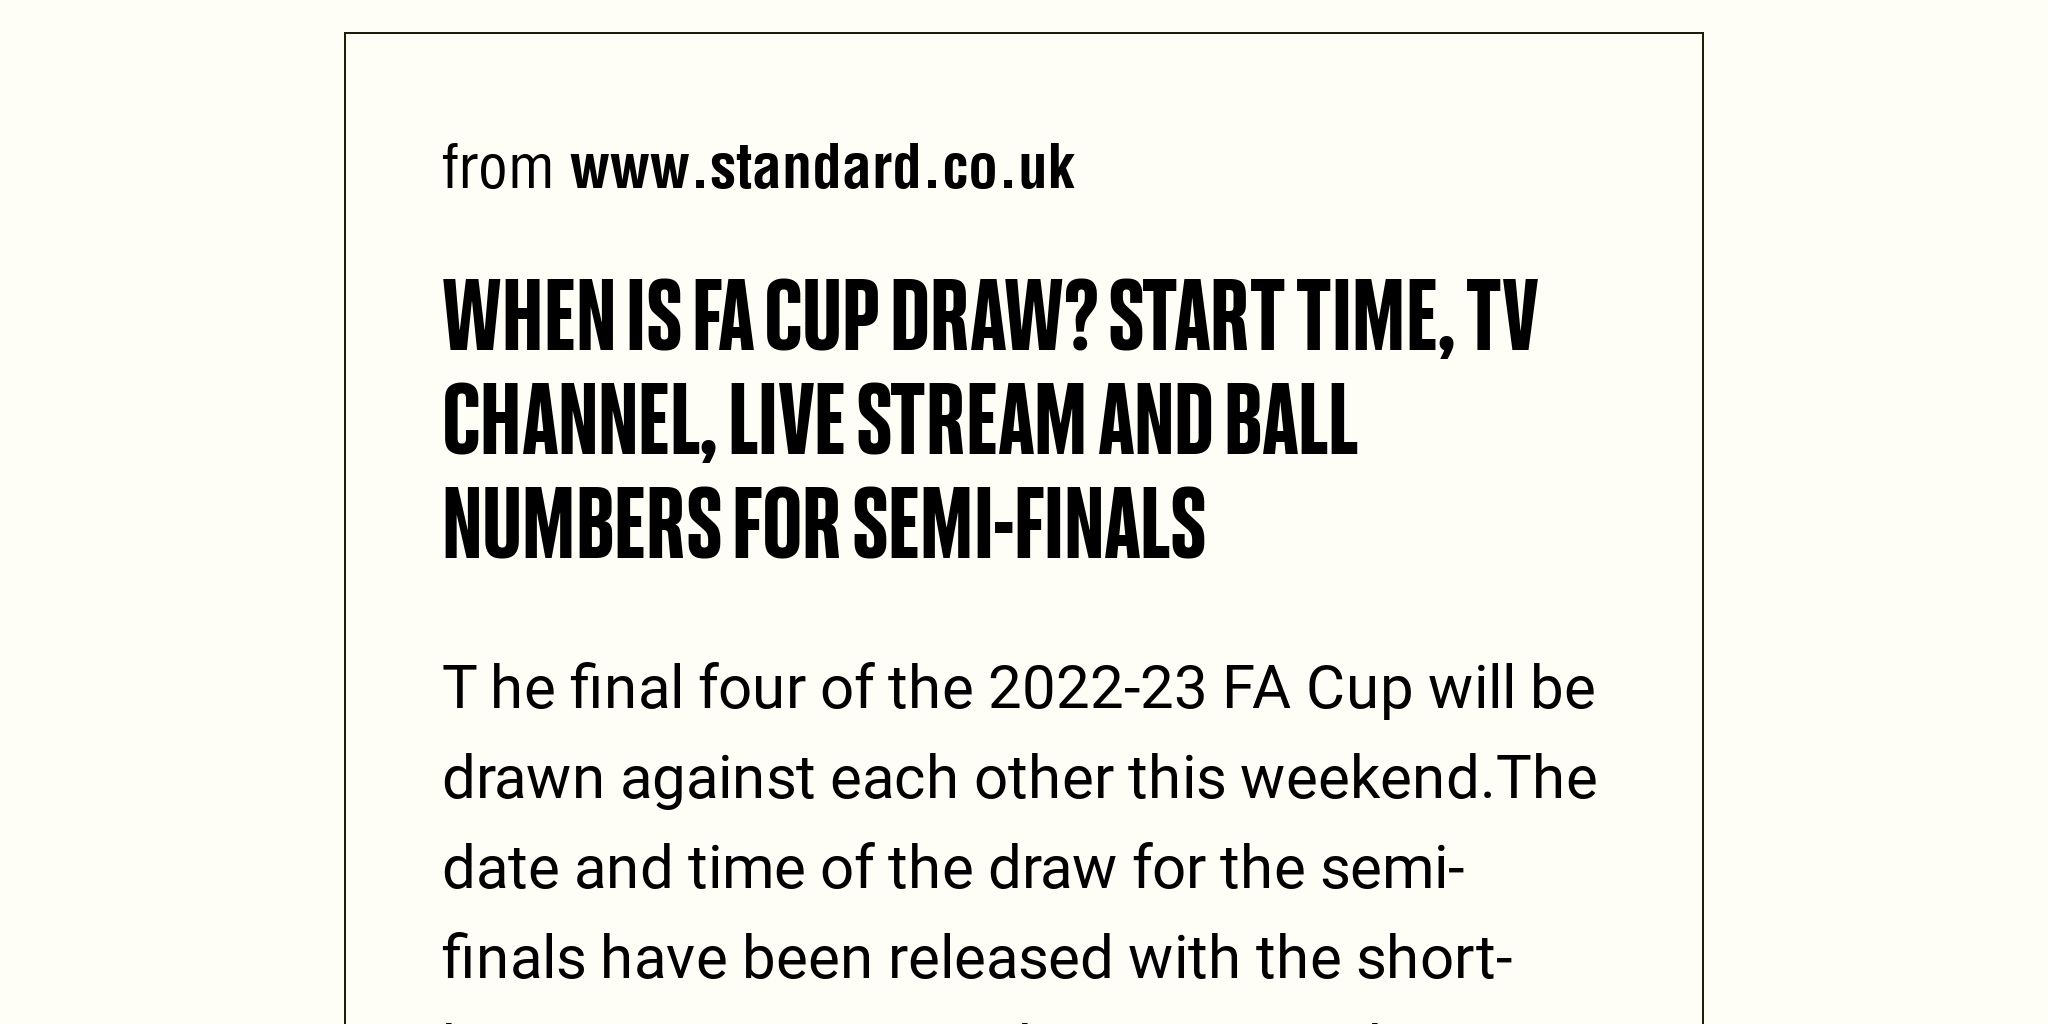 When is FA Cup draw? Start time, TV channel, live stream and ball